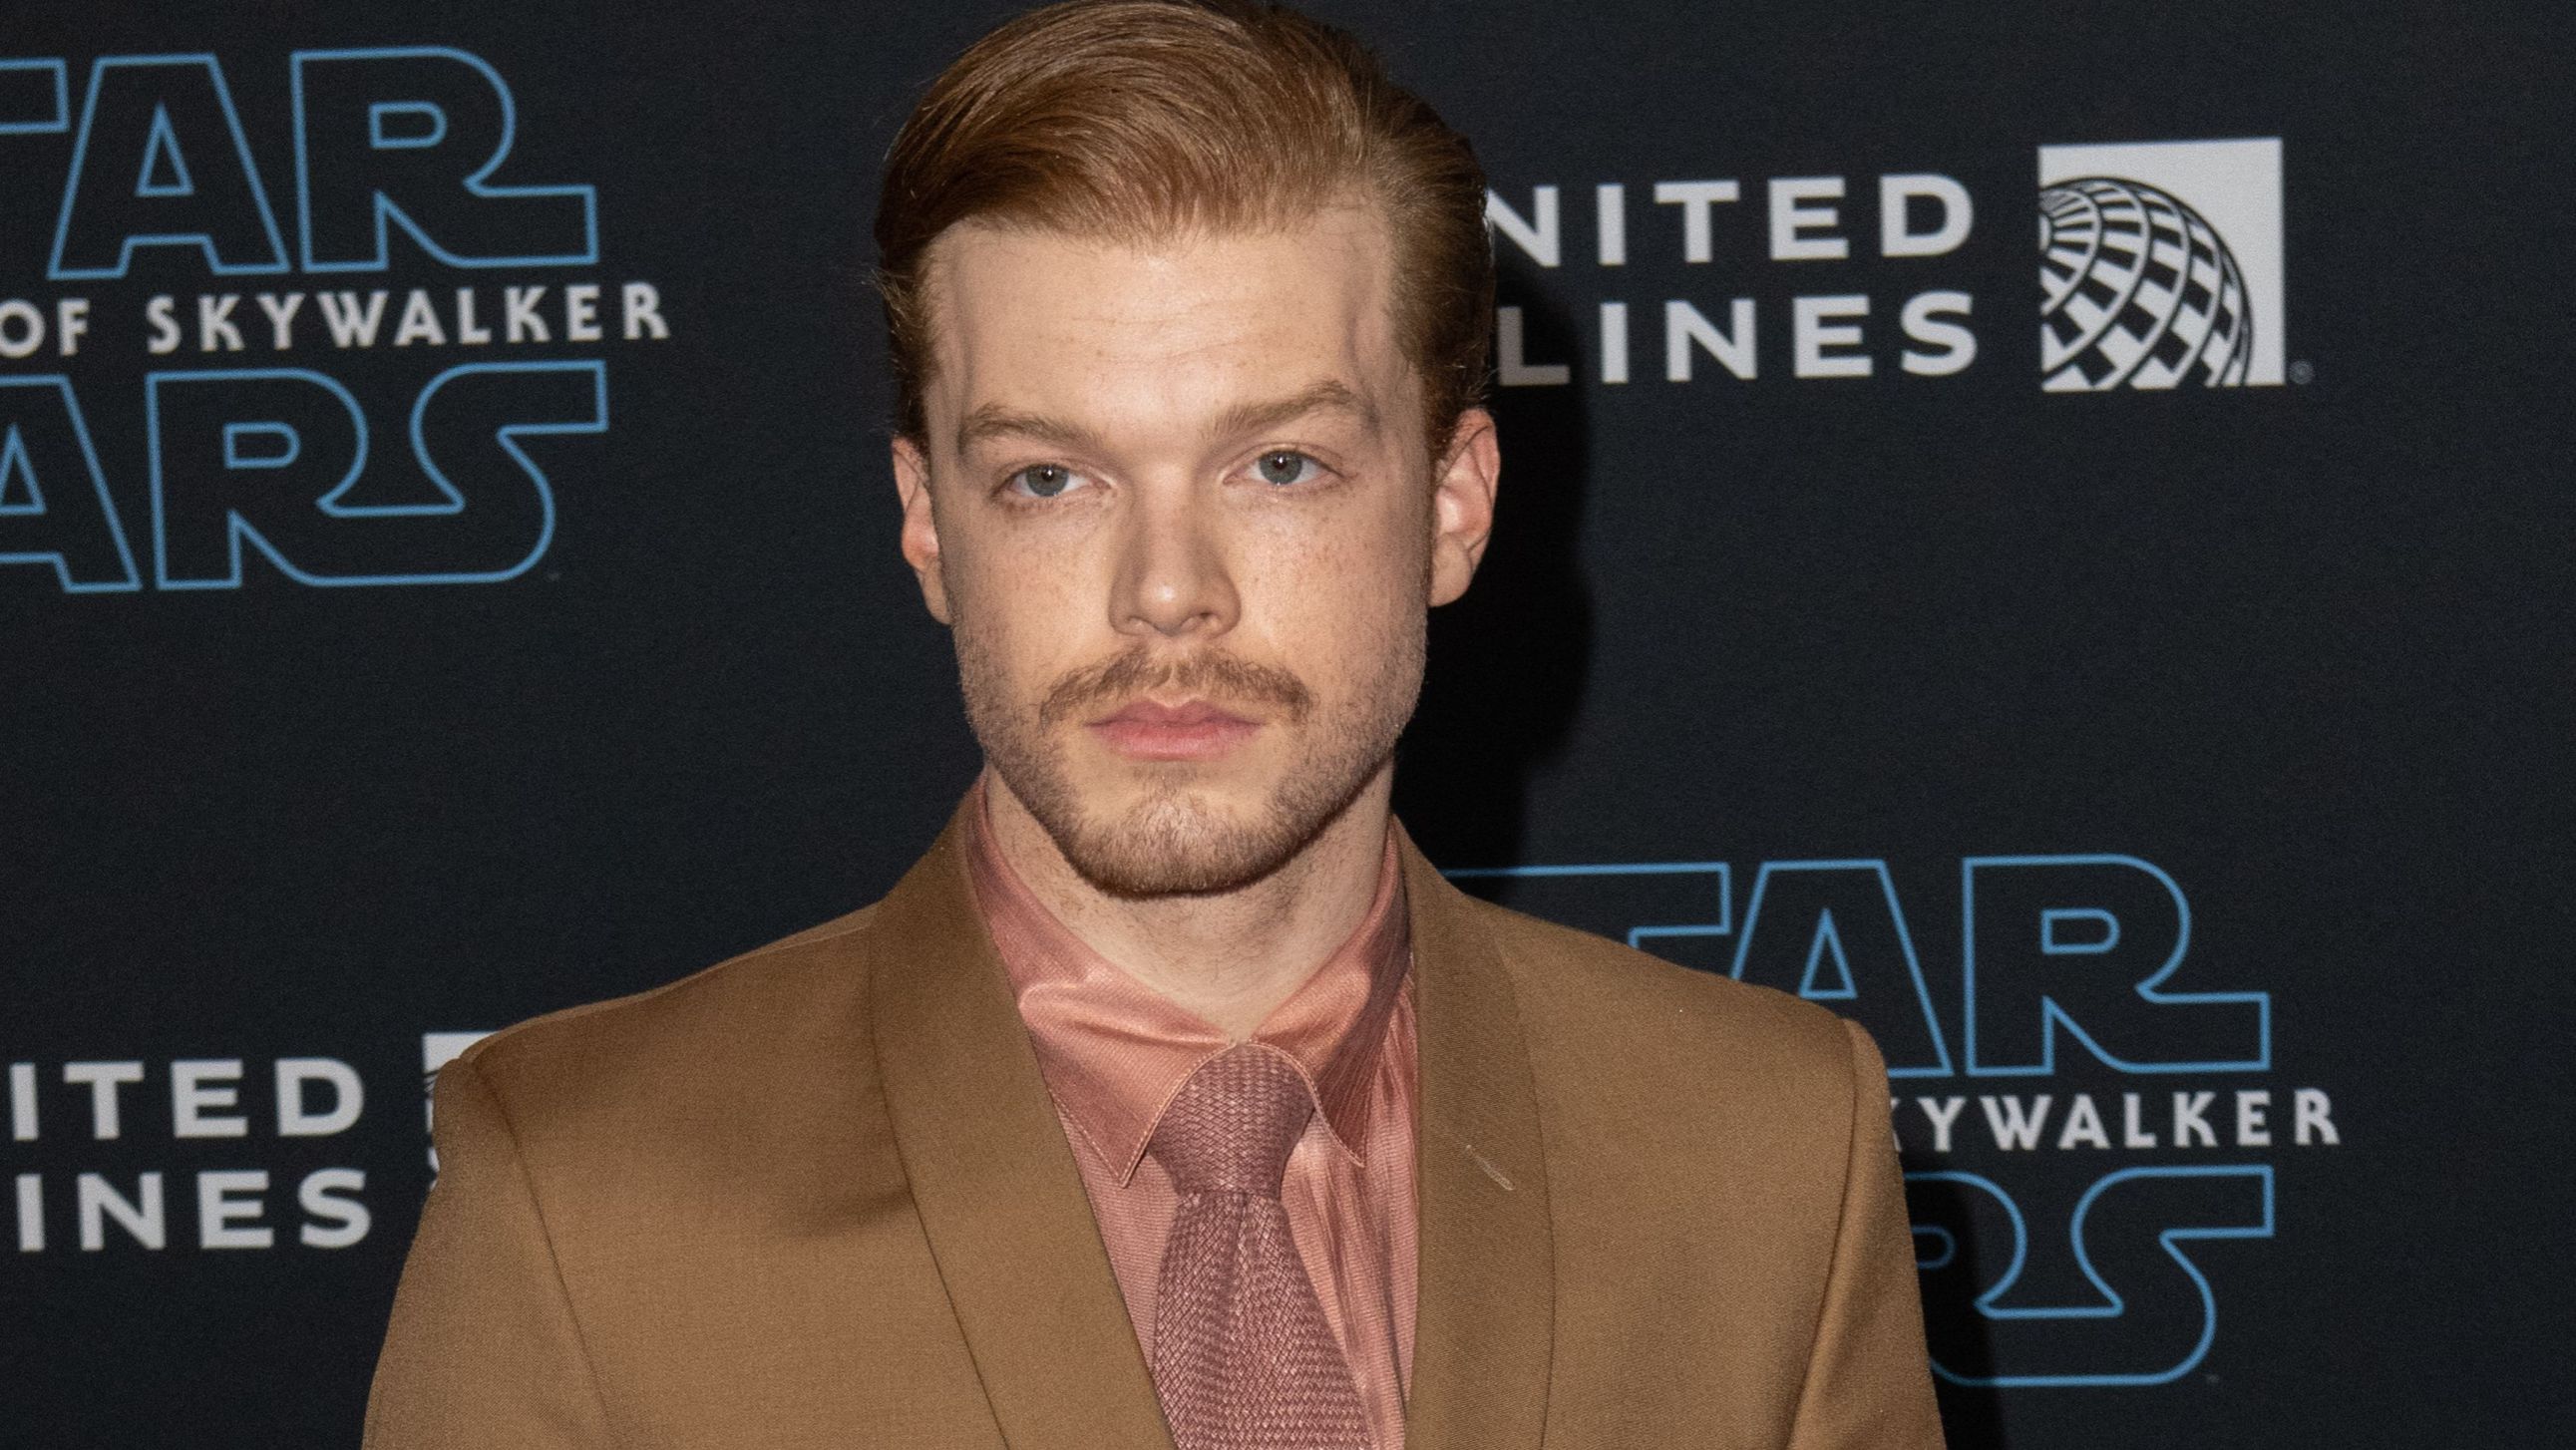 Cameron Monaghan wears a tan suit and orange shirt.